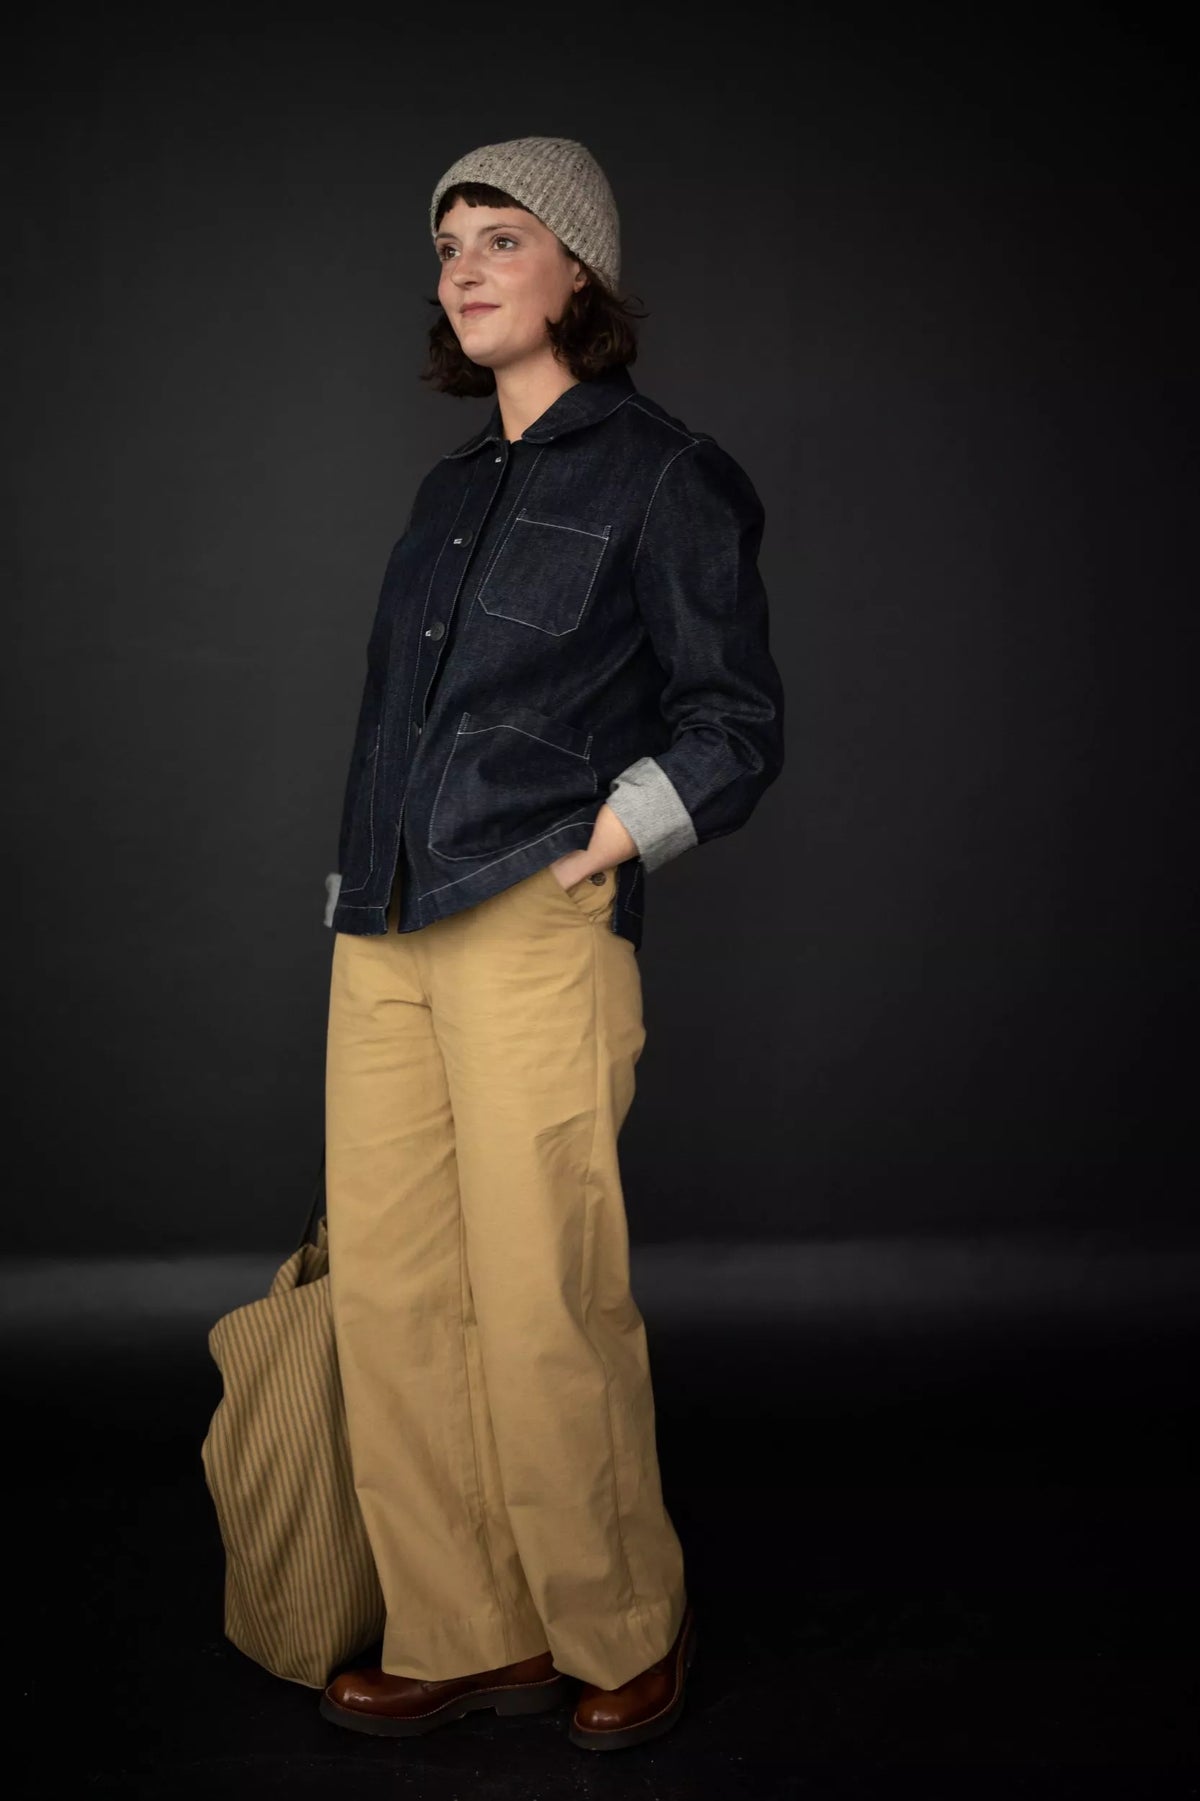 QUINN Trousers Sewing Pattern by Merchant & Mills